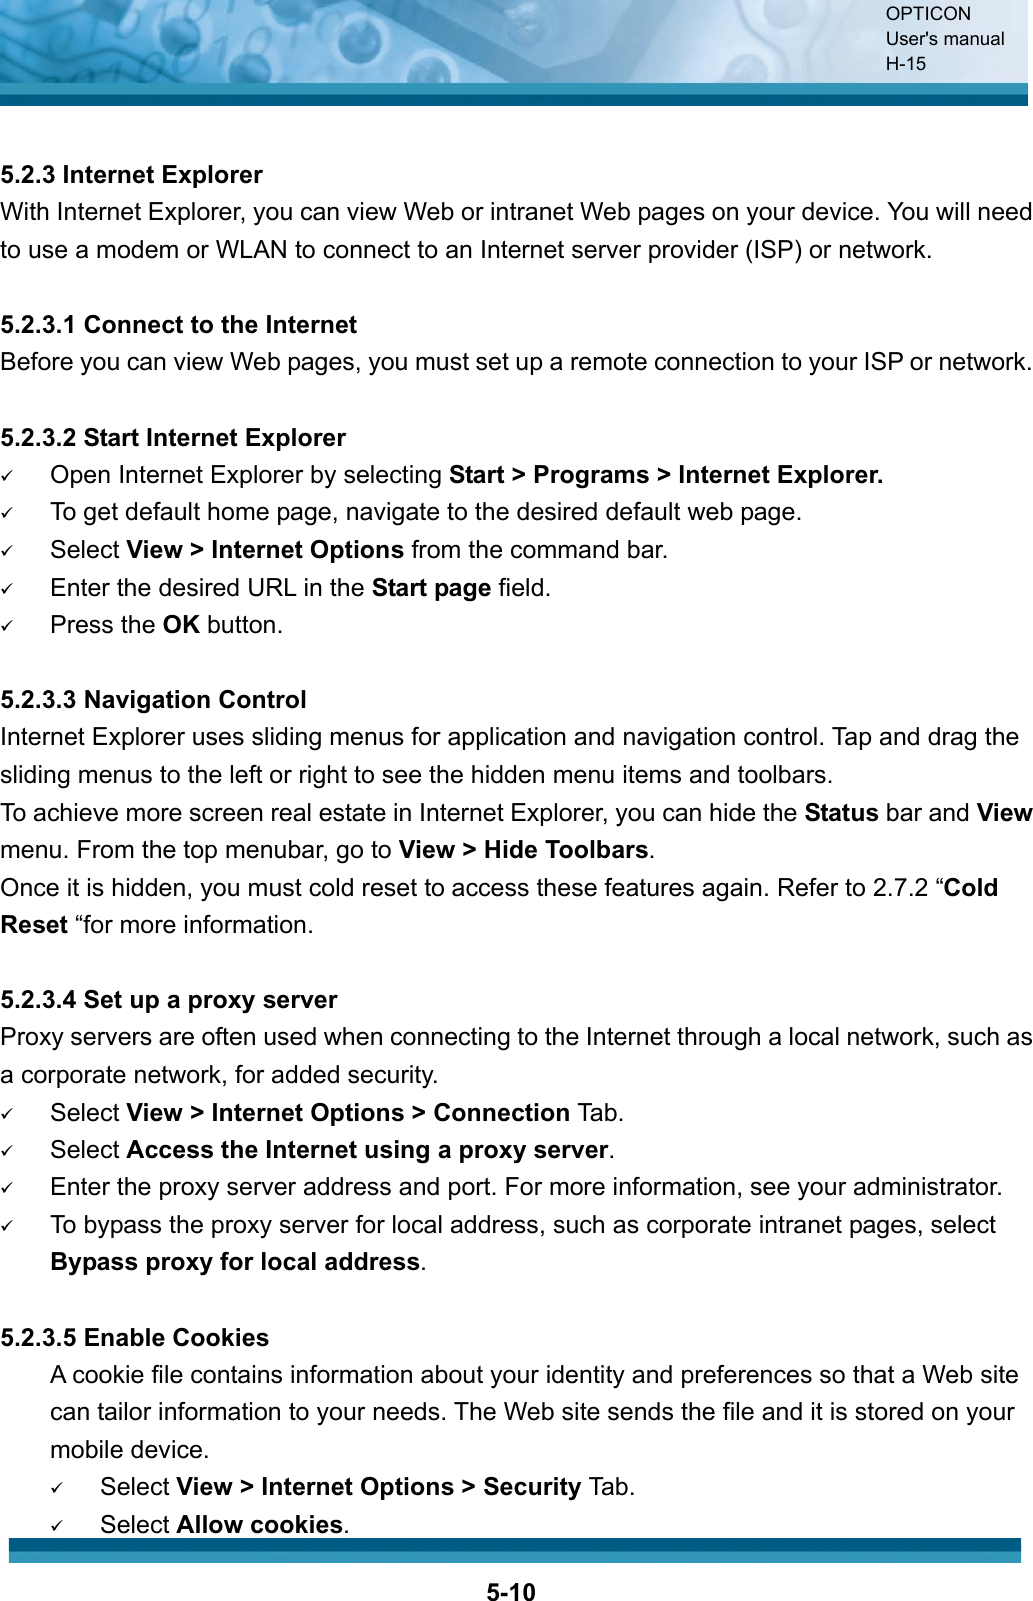 OPTICON User&apos;s manual H-155-105.2.3 Internet Explorer With Internet Explorer, you can view Web or intranet Web pages on your device. You will need to use a modem or WLAN to connect to an Internet server provider (ISP) or network. 5.2.3.1 Connect to the Internet Before you can view Web pages, you must set up a remote connection to your ISP or network. 5.2.3.2 Start Internet Explorer 9Open Internet Explorer by selecting Start &gt; Programs &gt; Internet Explorer.9To get default home page, navigate to the desired default web page.9Select View &gt; Internet Options from the command bar.9Enter the desired URL in the Start page field.9Press the OK button.5.2.3.3 Navigation Control Internet Explorer uses sliding menus for application and navigation control. Tap and drag the sliding menus to the left or right to see the hidden menu items and toolbars. To achieve more screen real estate in Internet Explorer, you can hide the Status bar and Viewmenu. From the top menubar, go to View &gt; Hide Toolbars.Once it is hidden, you must cold reset to access these features again. Refer to 2.7.2 “ColdReset “for more information. 5.2.3.4 Set up a proxy server Proxy servers are often used when connecting to the Internet through a local network, such as a corporate network, for added security. 9Select View &gt; Internet Options &gt; Connection Tab.9Select Access the Internet using a proxy server.9Enter the proxy server address and port. For more information, see your administrator.9To bypass the proxy server for local address, such as corporate intranet pages, select Bypass proxy for local address.5.2.3.5 Enable Cookies A cookie file contains information about your identity and preferences so that a Web site can tailor information to your needs. The Web site sends the file and it is stored on your mobile device. 9Select View &gt; Internet Options &gt; Security Tab.9Select Allow cookies.